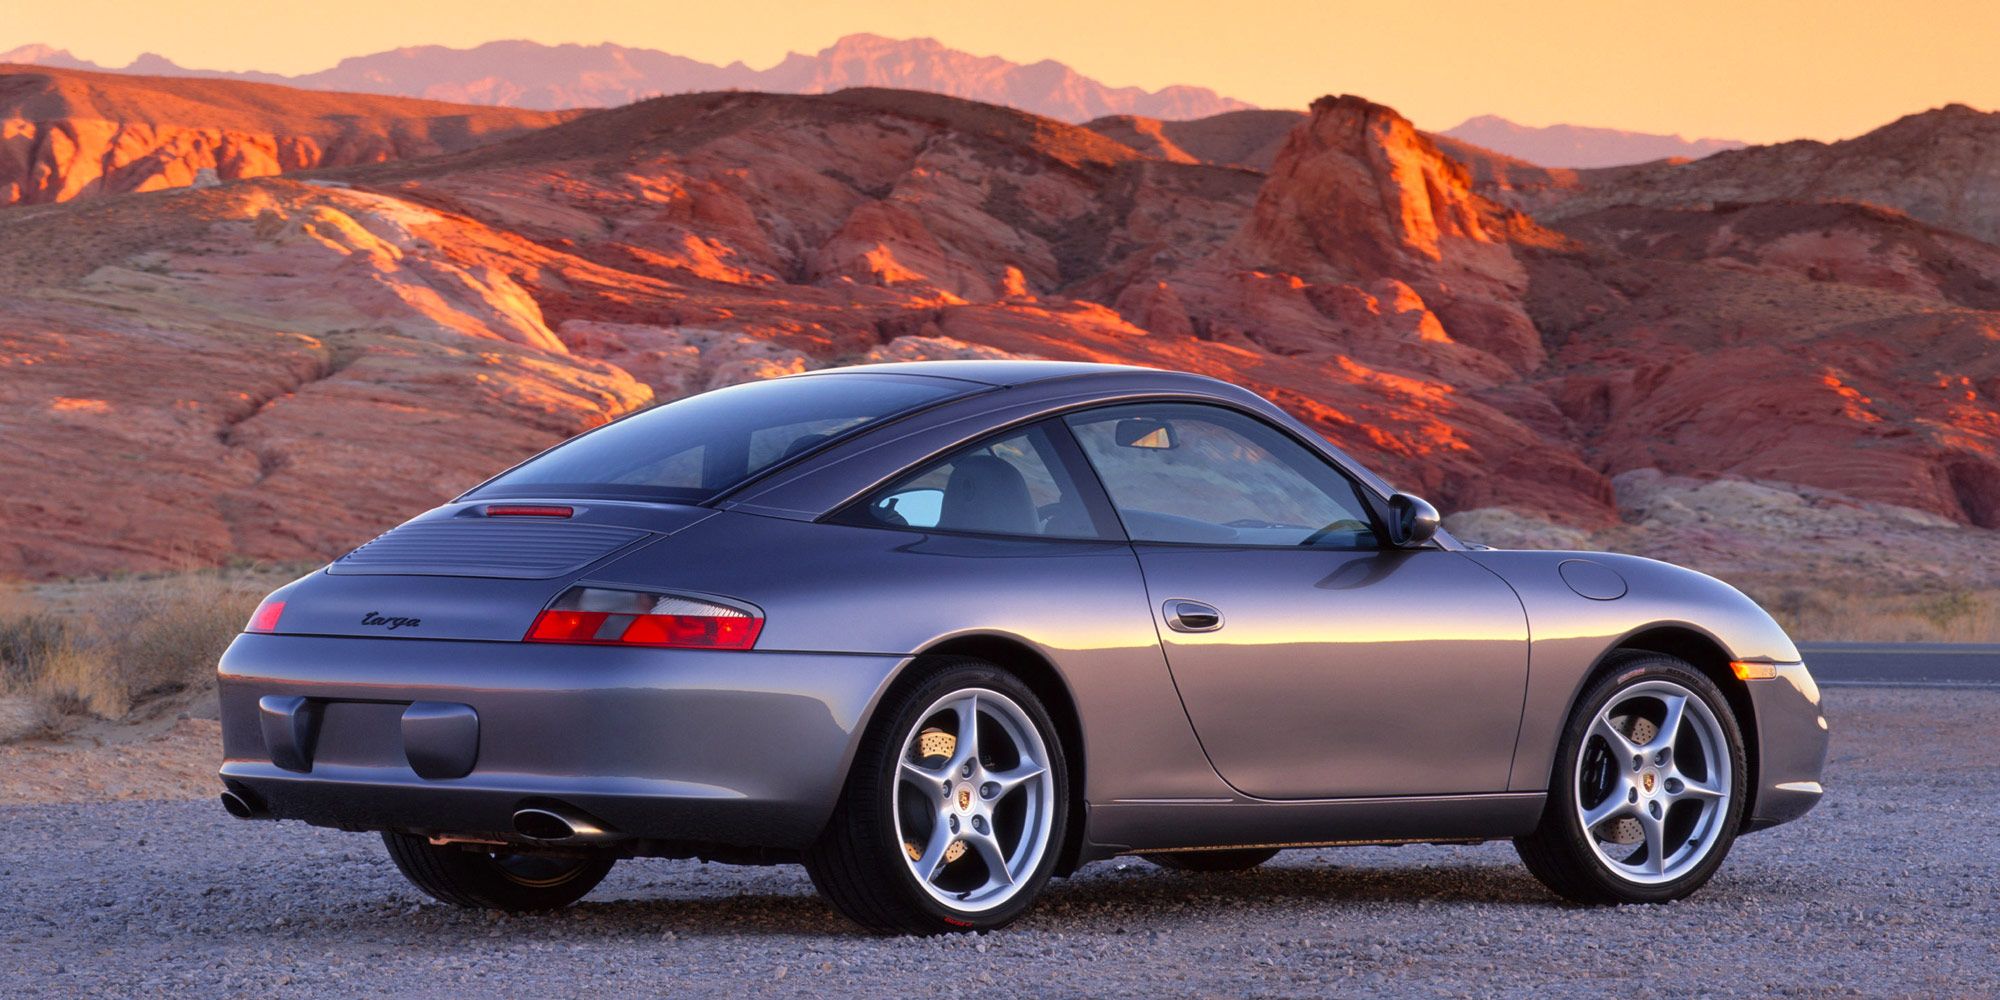 What You Should Know about the Porsche 996